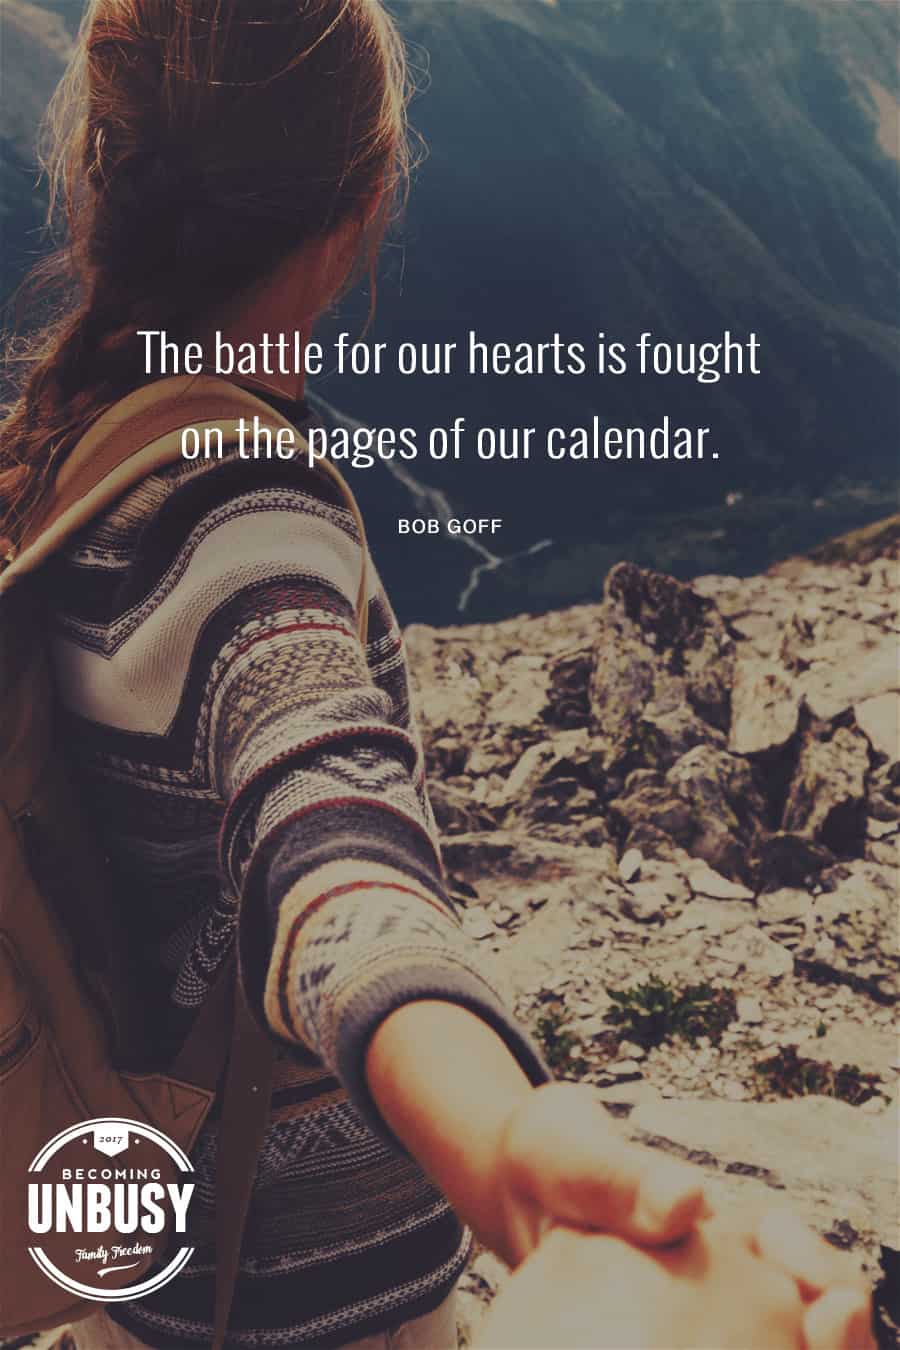 The battle for our hearts is fought on the pages of our calendars. #quote #parenting #lifequote #becomingunbusy *Love this whole post about slowing down time. So good.